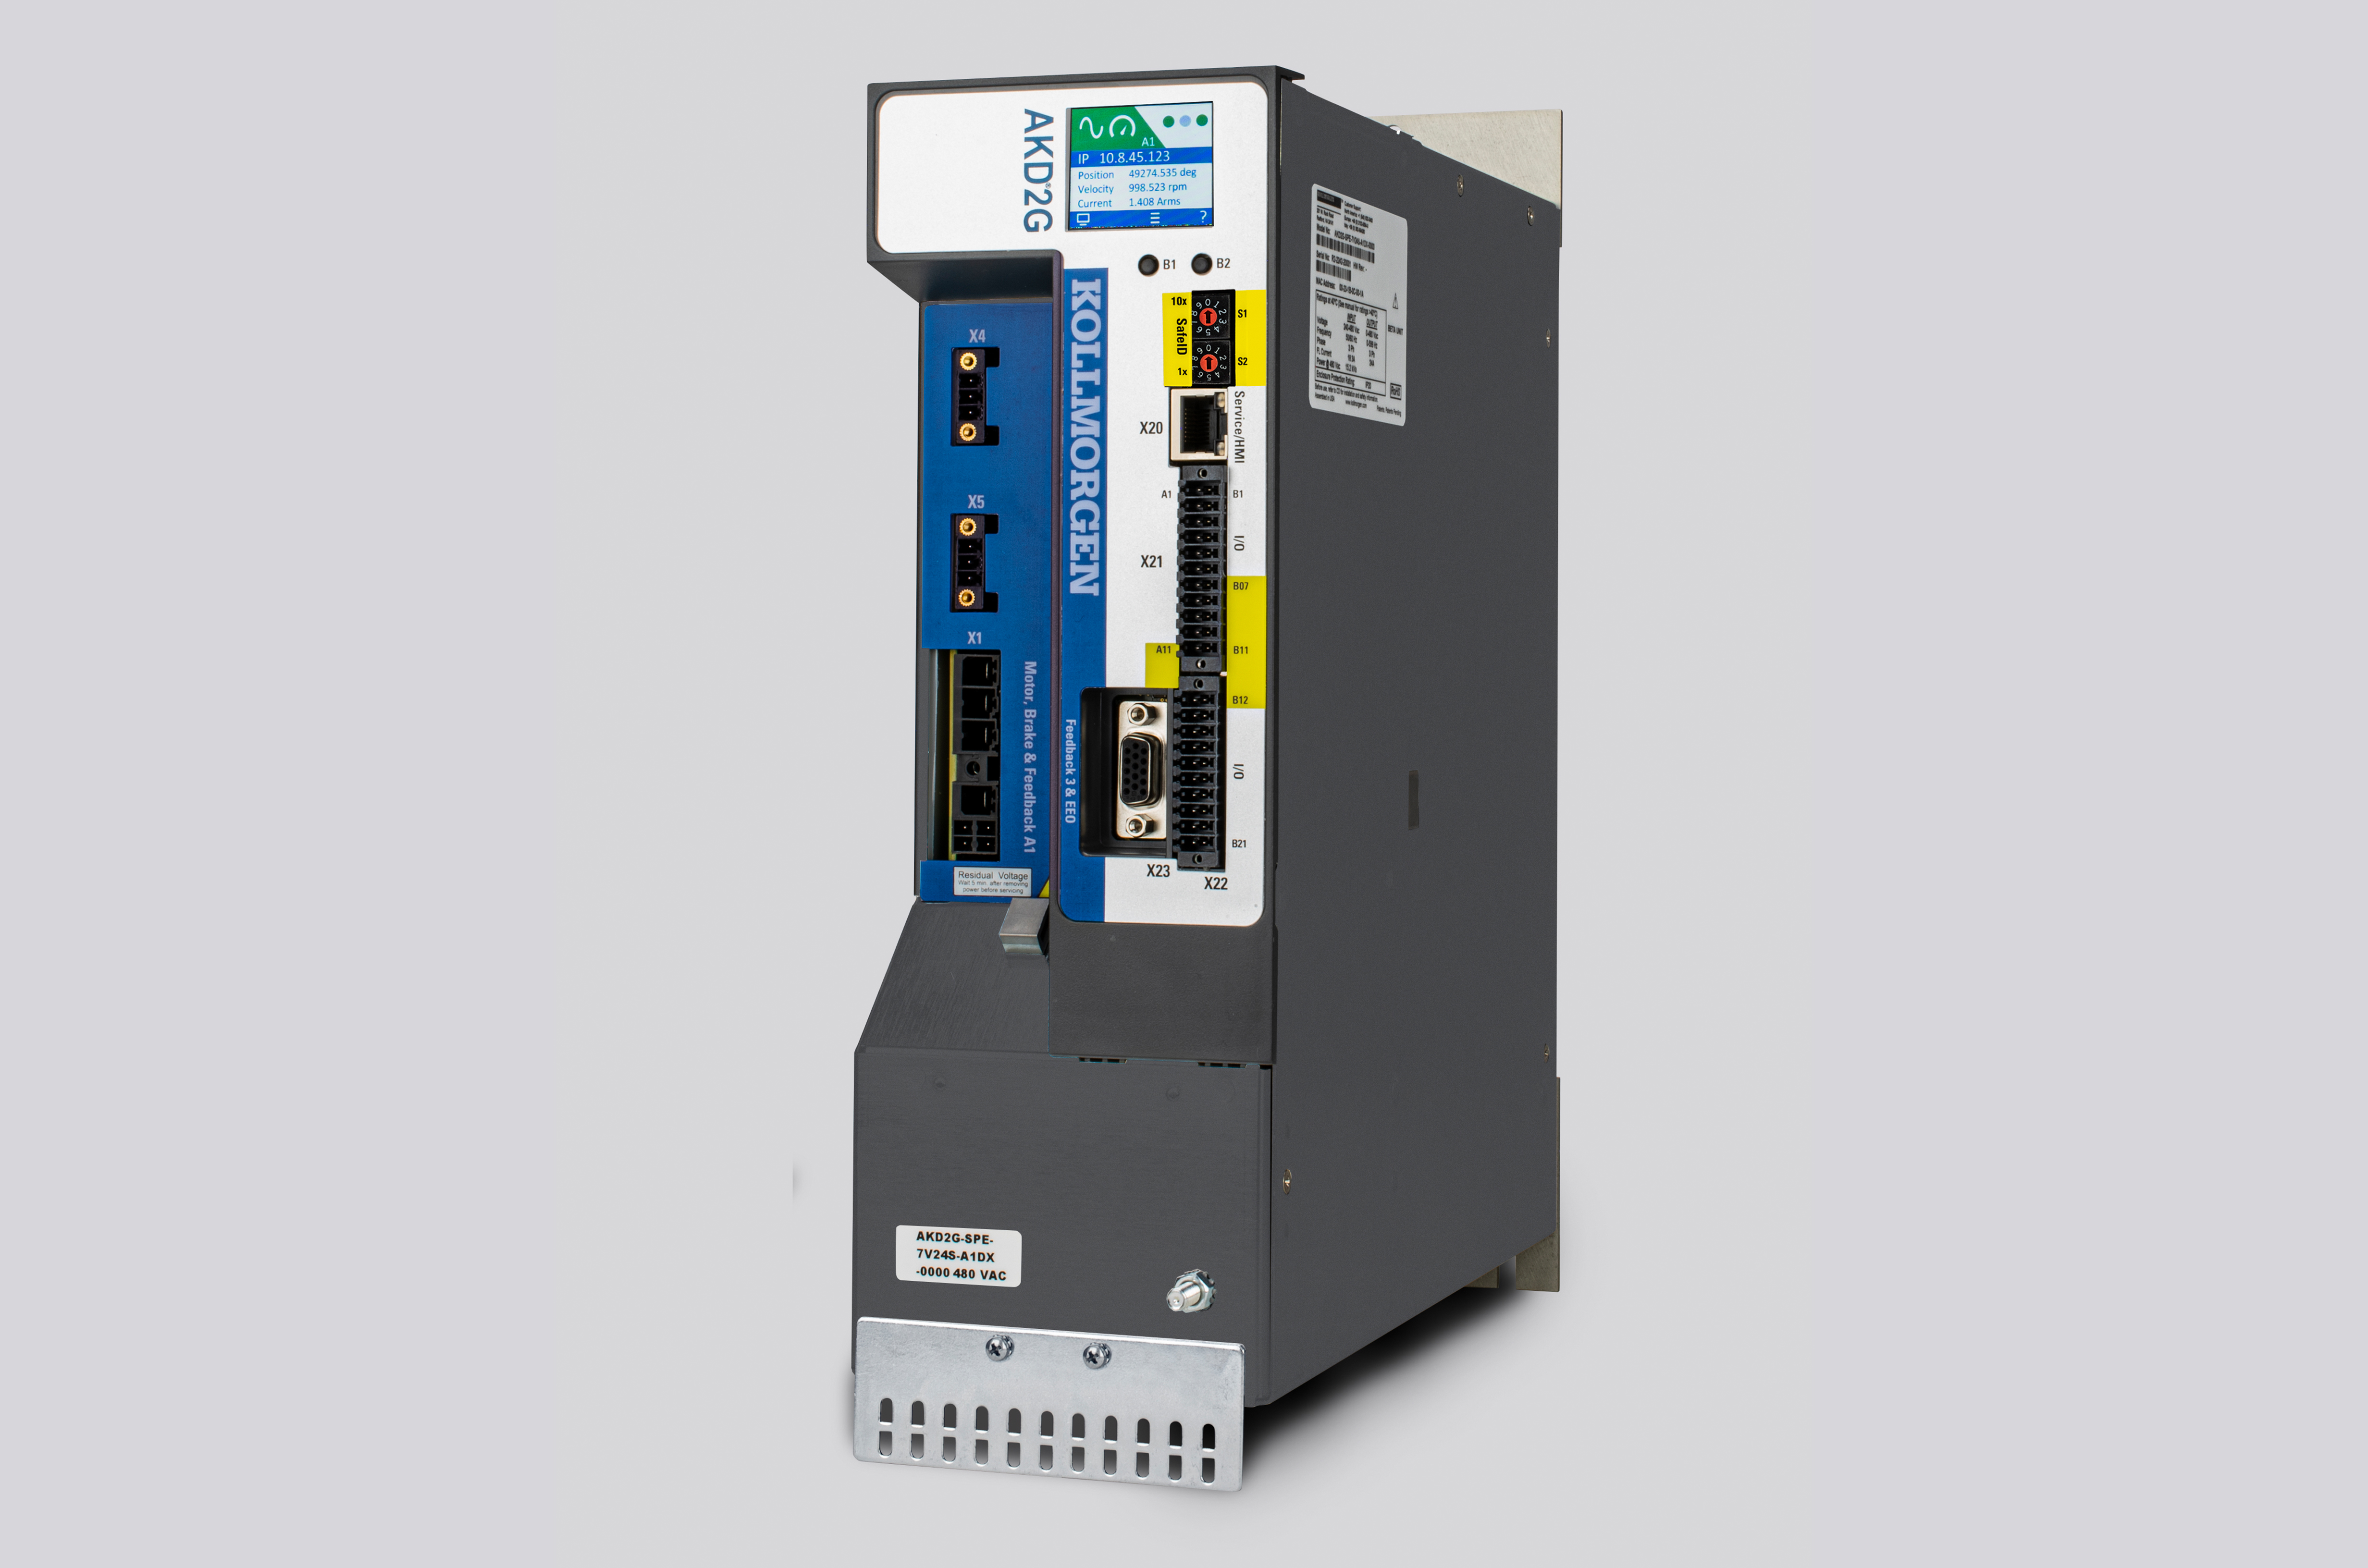 Kollmorgen expands the performance and flexibility of its flagship AKD2G servo drive series with the new, 24A drive